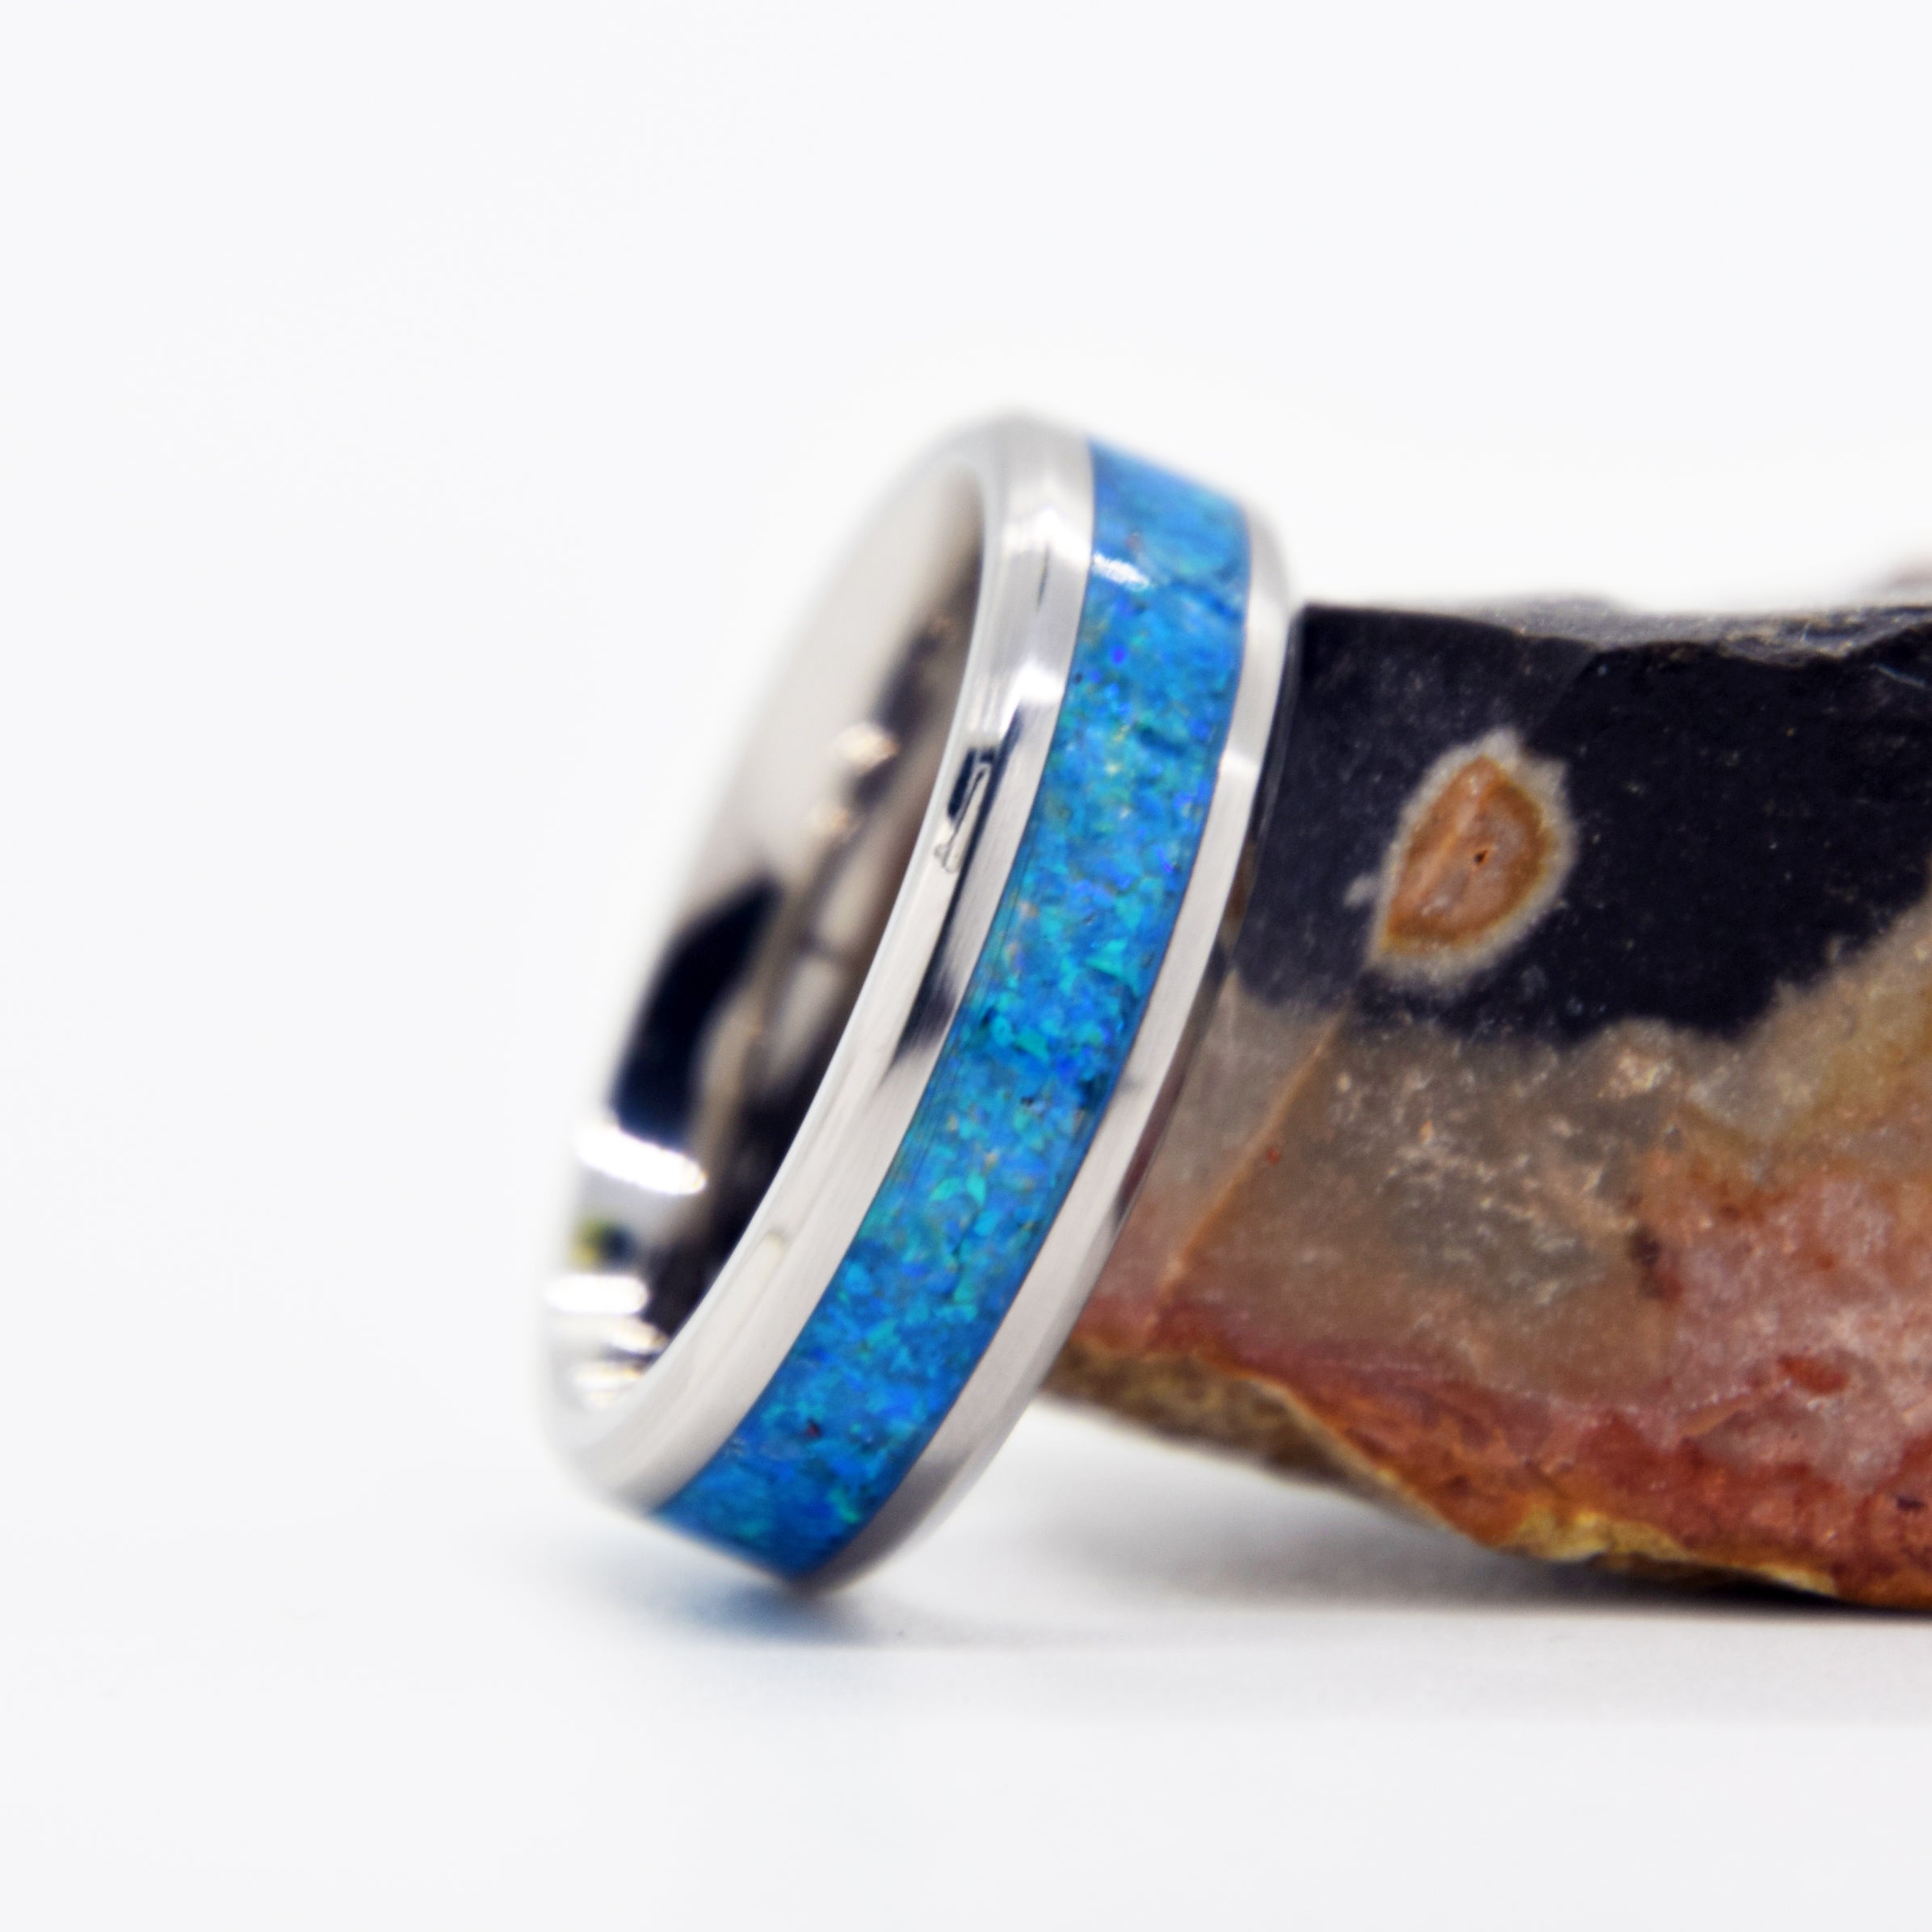 Oasis Blue Opal Ring With Titanium Band Copperbeard Jewelry